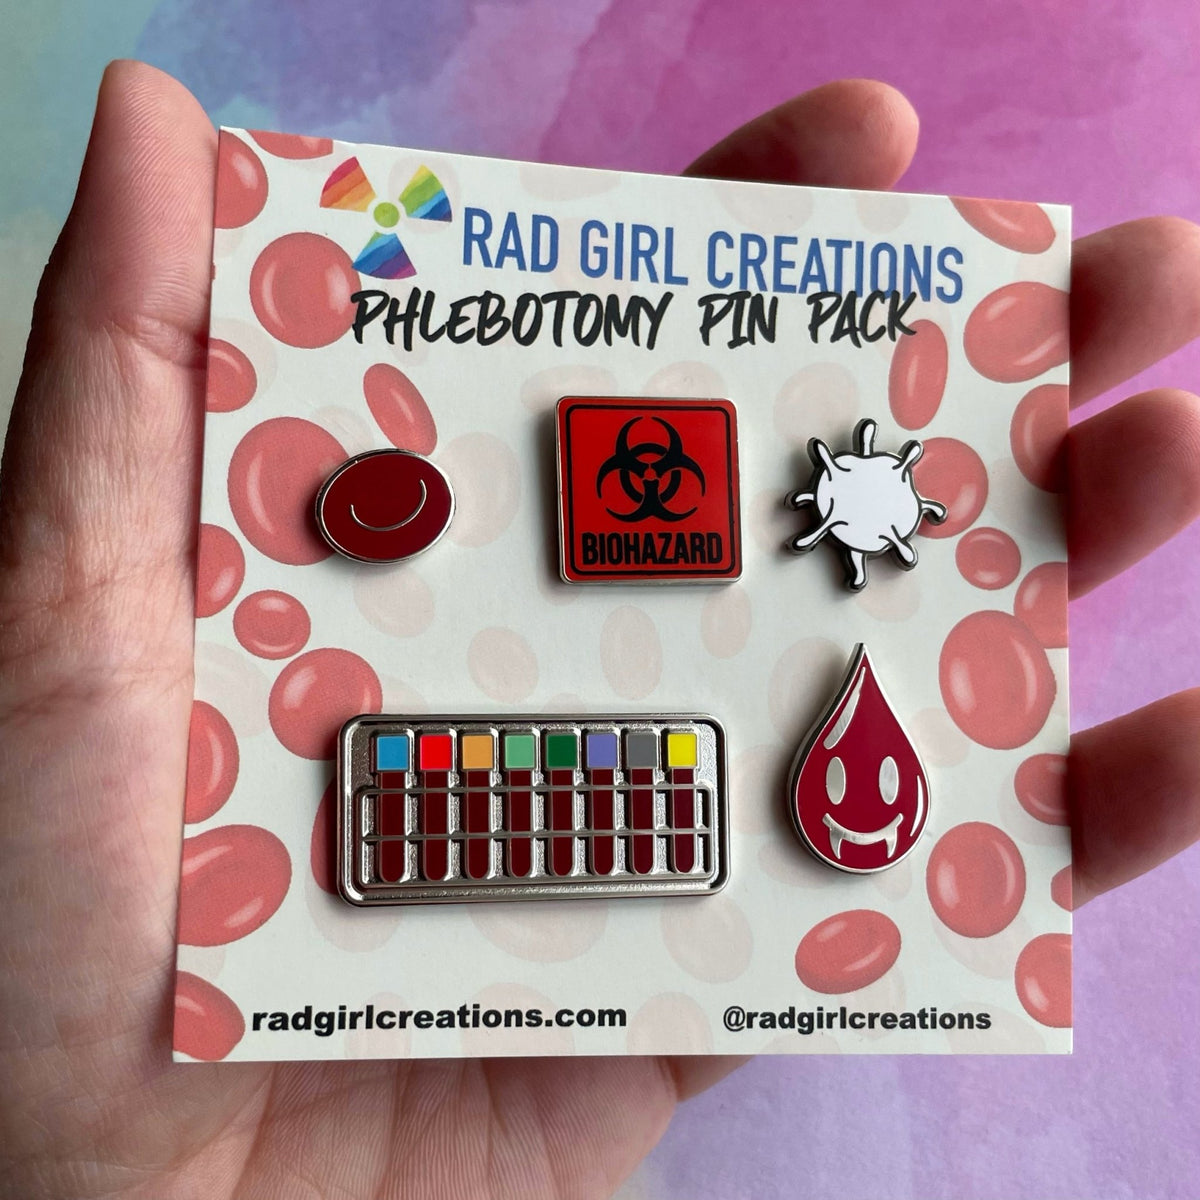 Phlebotomy Pin Pack - Rad Girl Creations